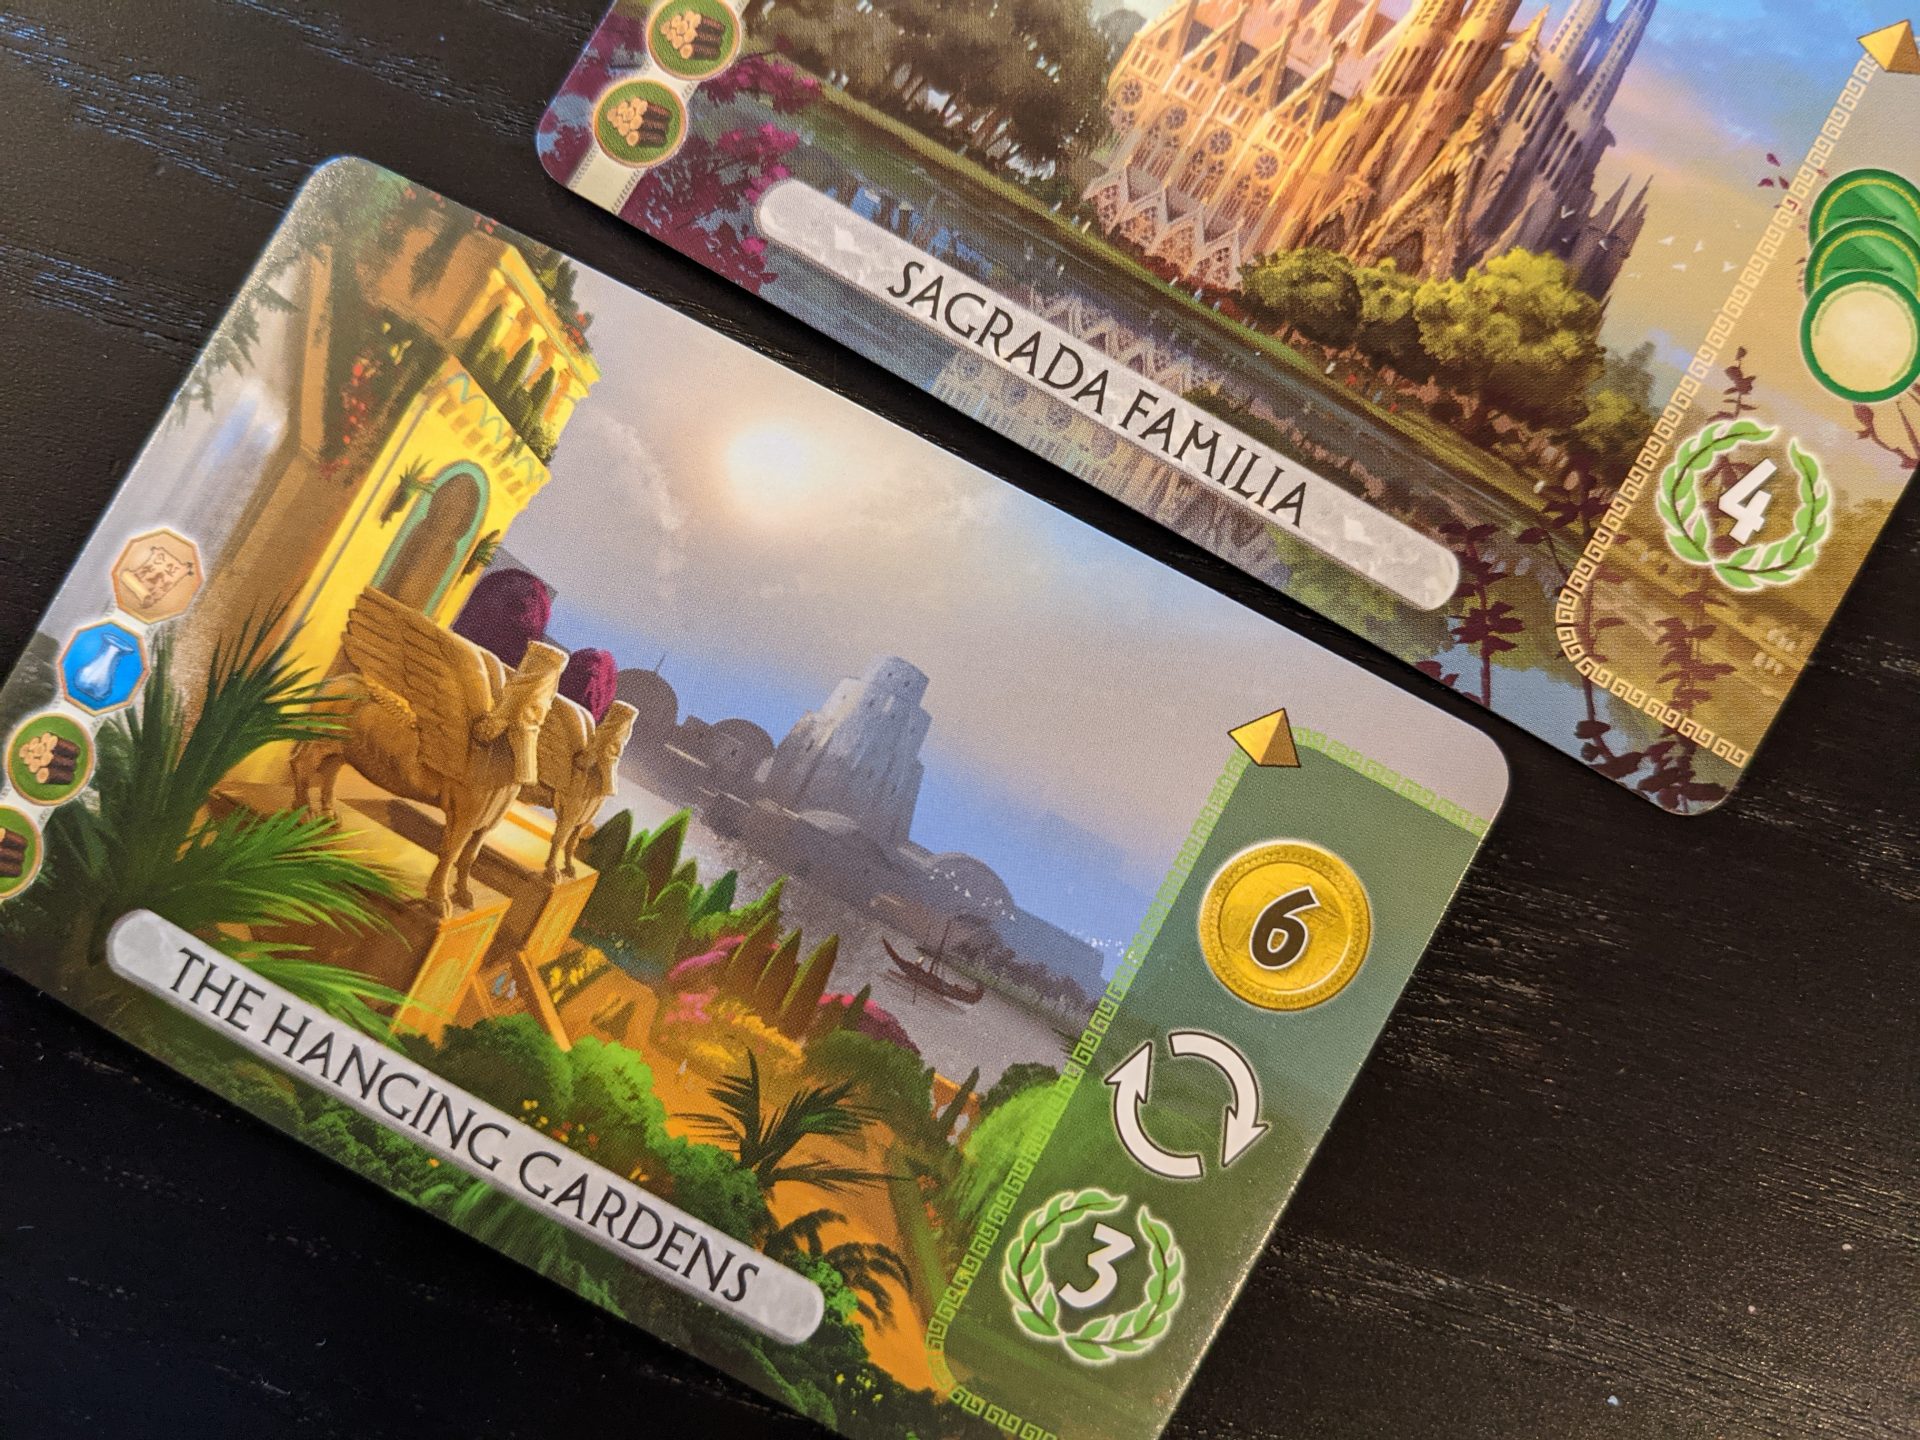 7 Wonders Duel Promos and Coin Set (sold separately)